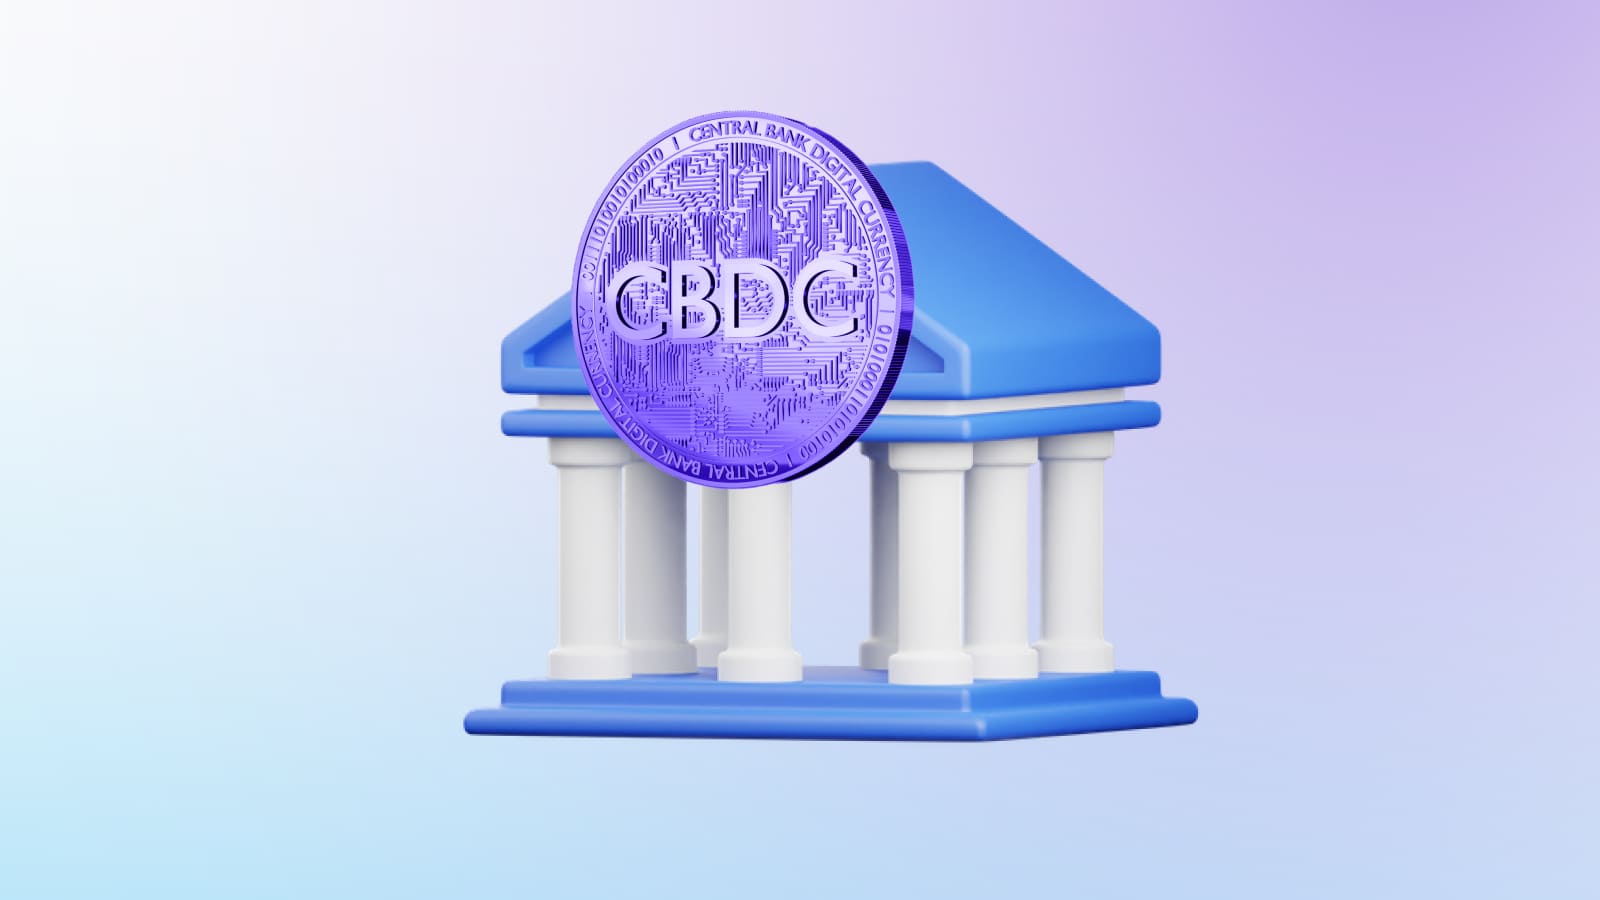 CBDC implementation requires significant resources for financial system adaptation and security.